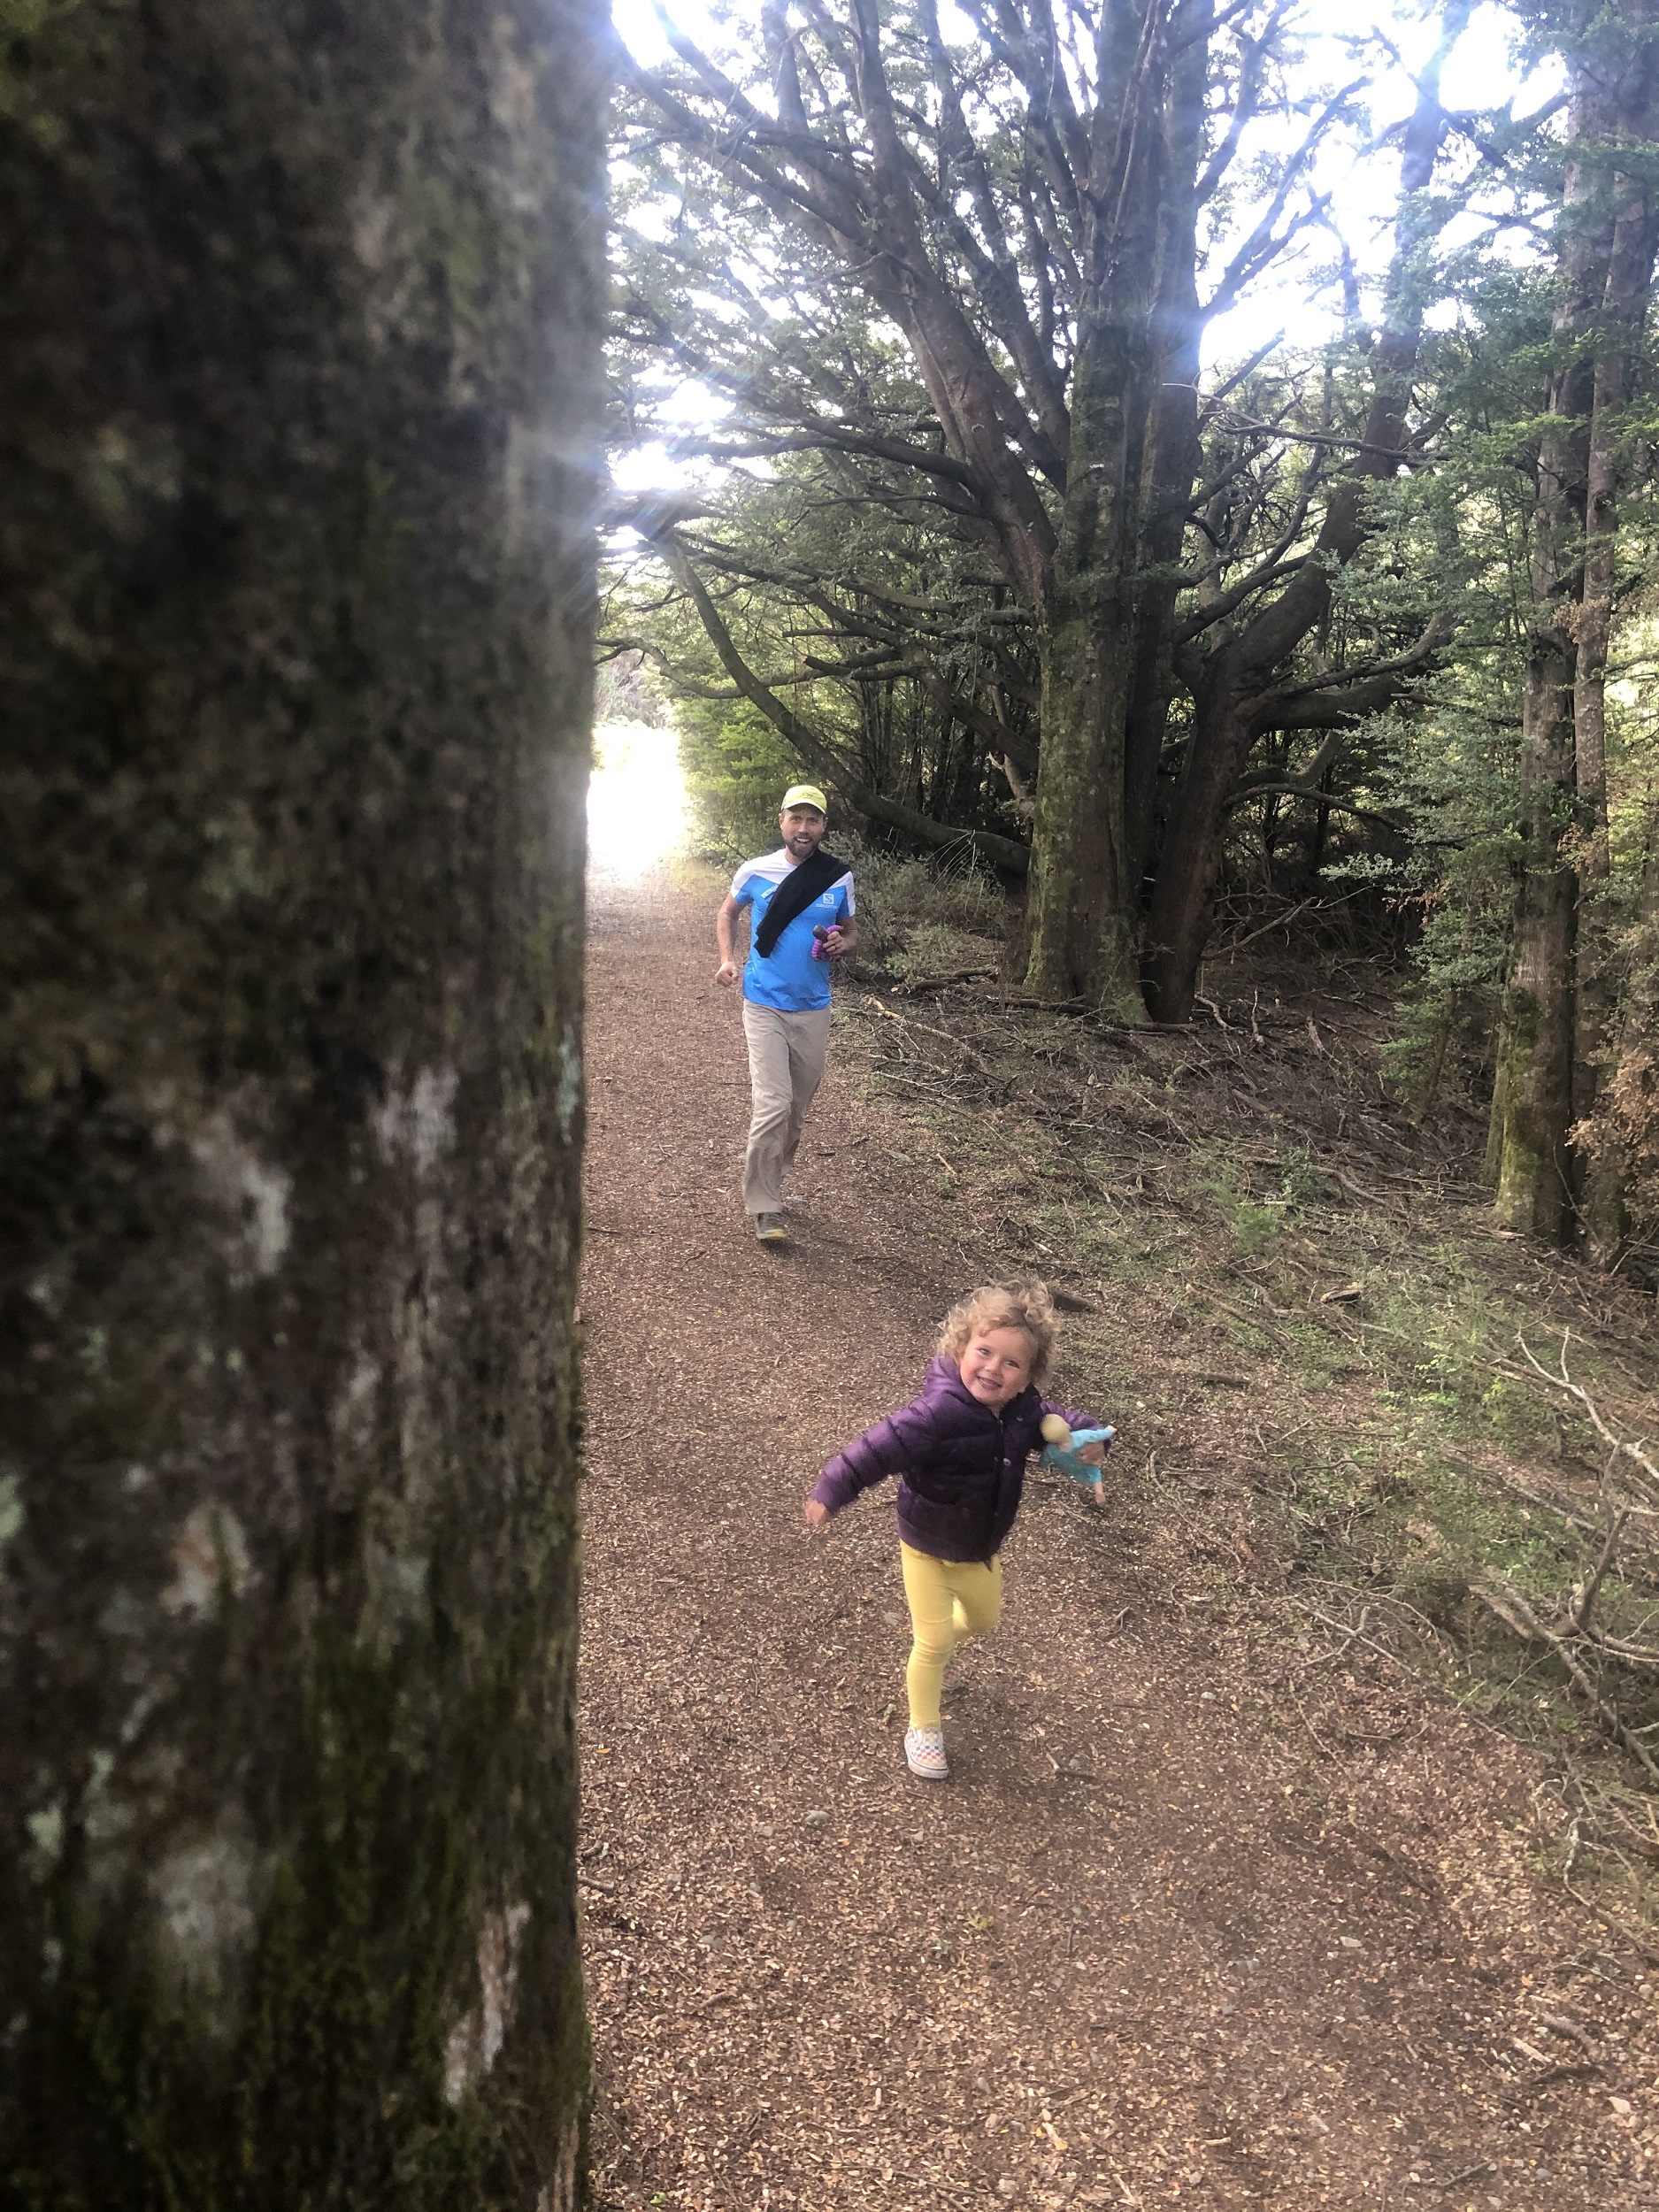 Playing Hide N Seek when hiking with a toddler